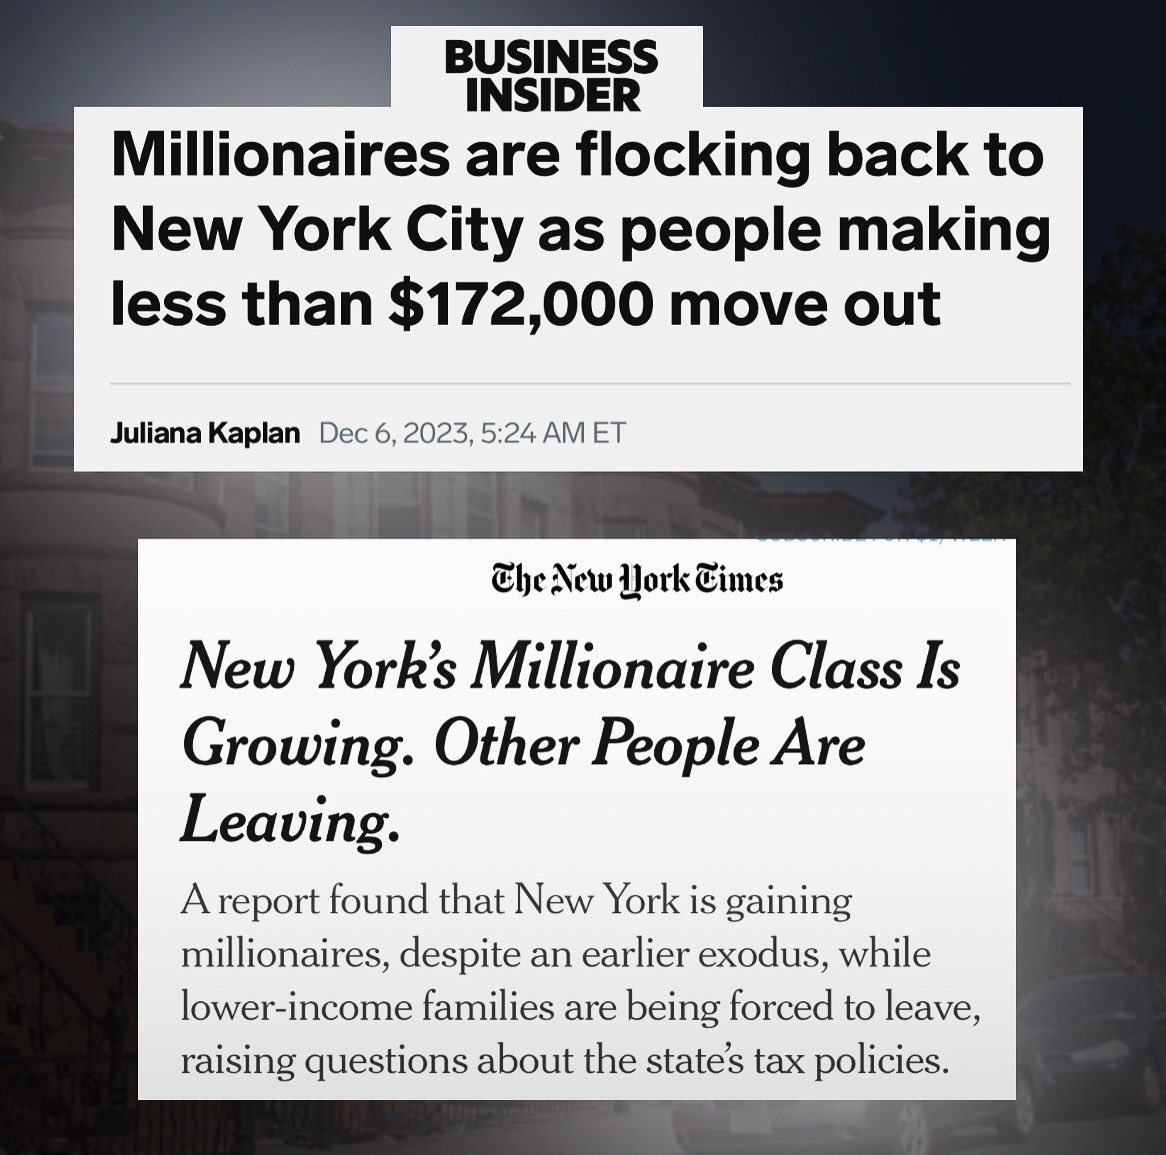 Interesting that #NYC claims to be one of the most “progressive” cities in the world, yet it’s only become less and less affordable for working class people. The majority of New Yorkers being pushed out are middle class working families.